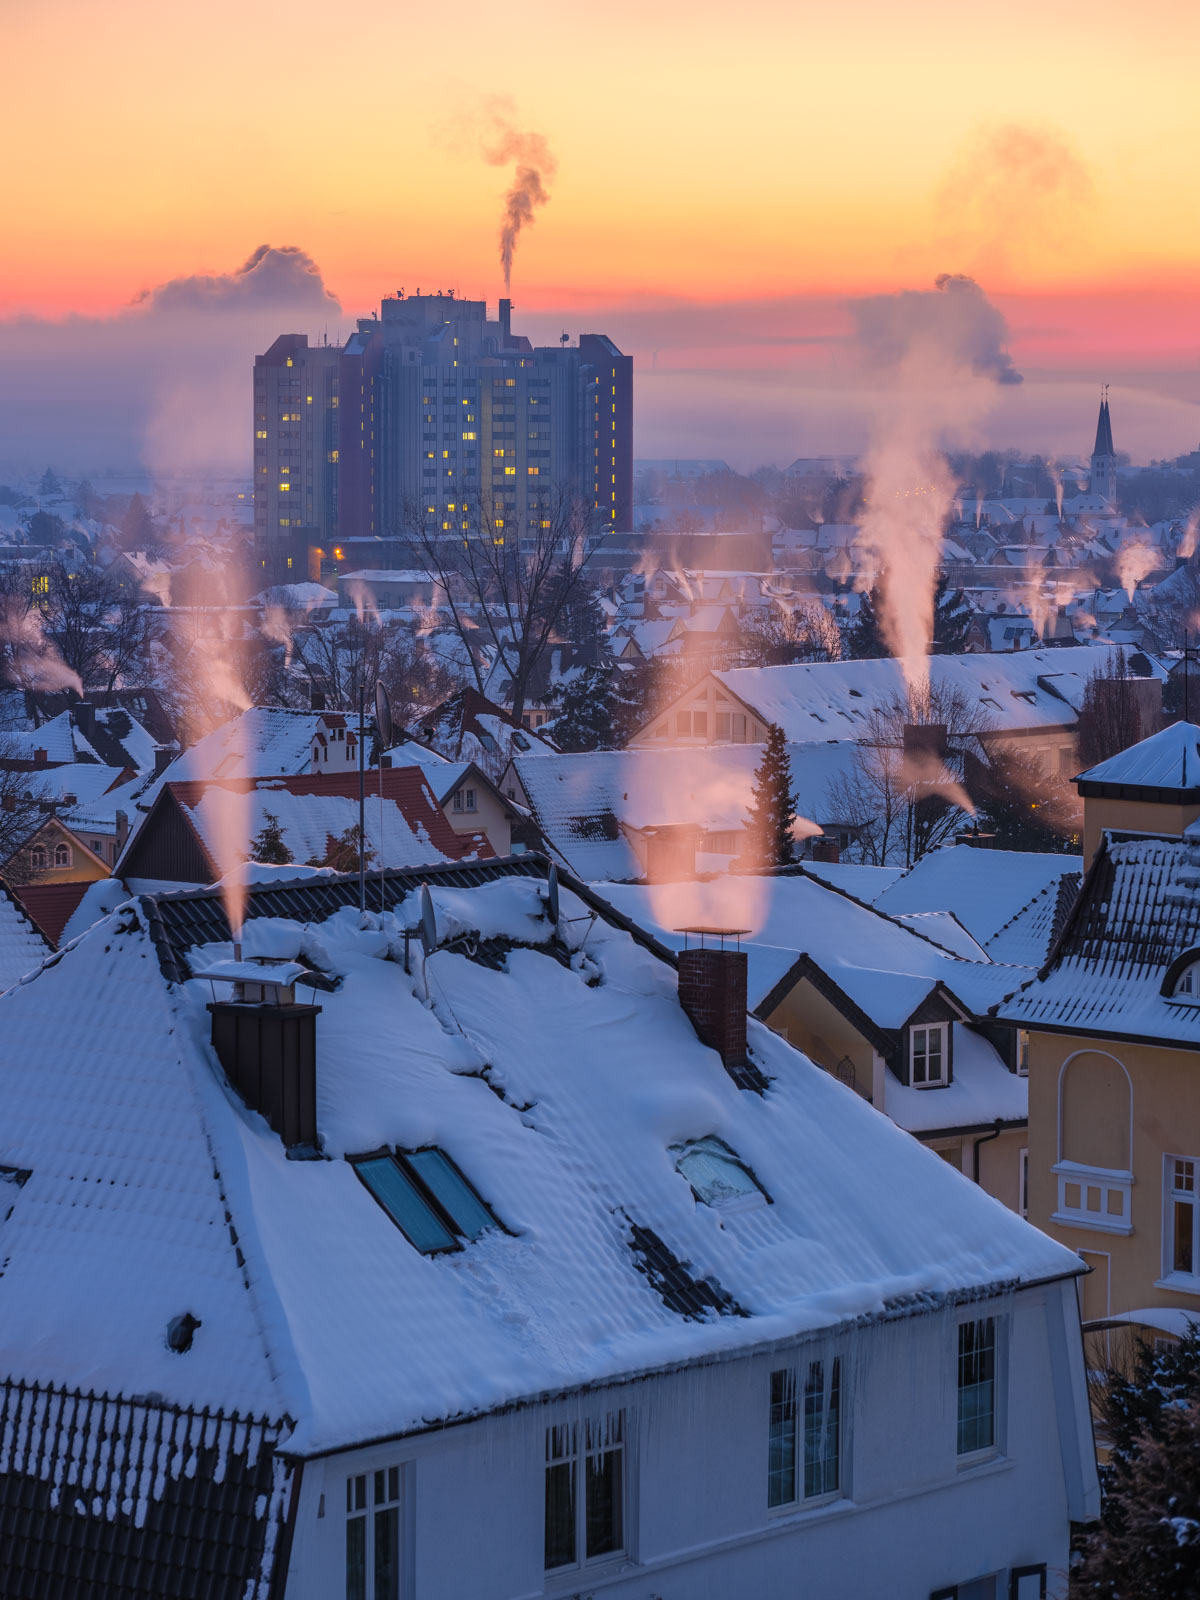 Early in the morning above the rooftops of Bielefeld on 13 February 2021 (Germany).